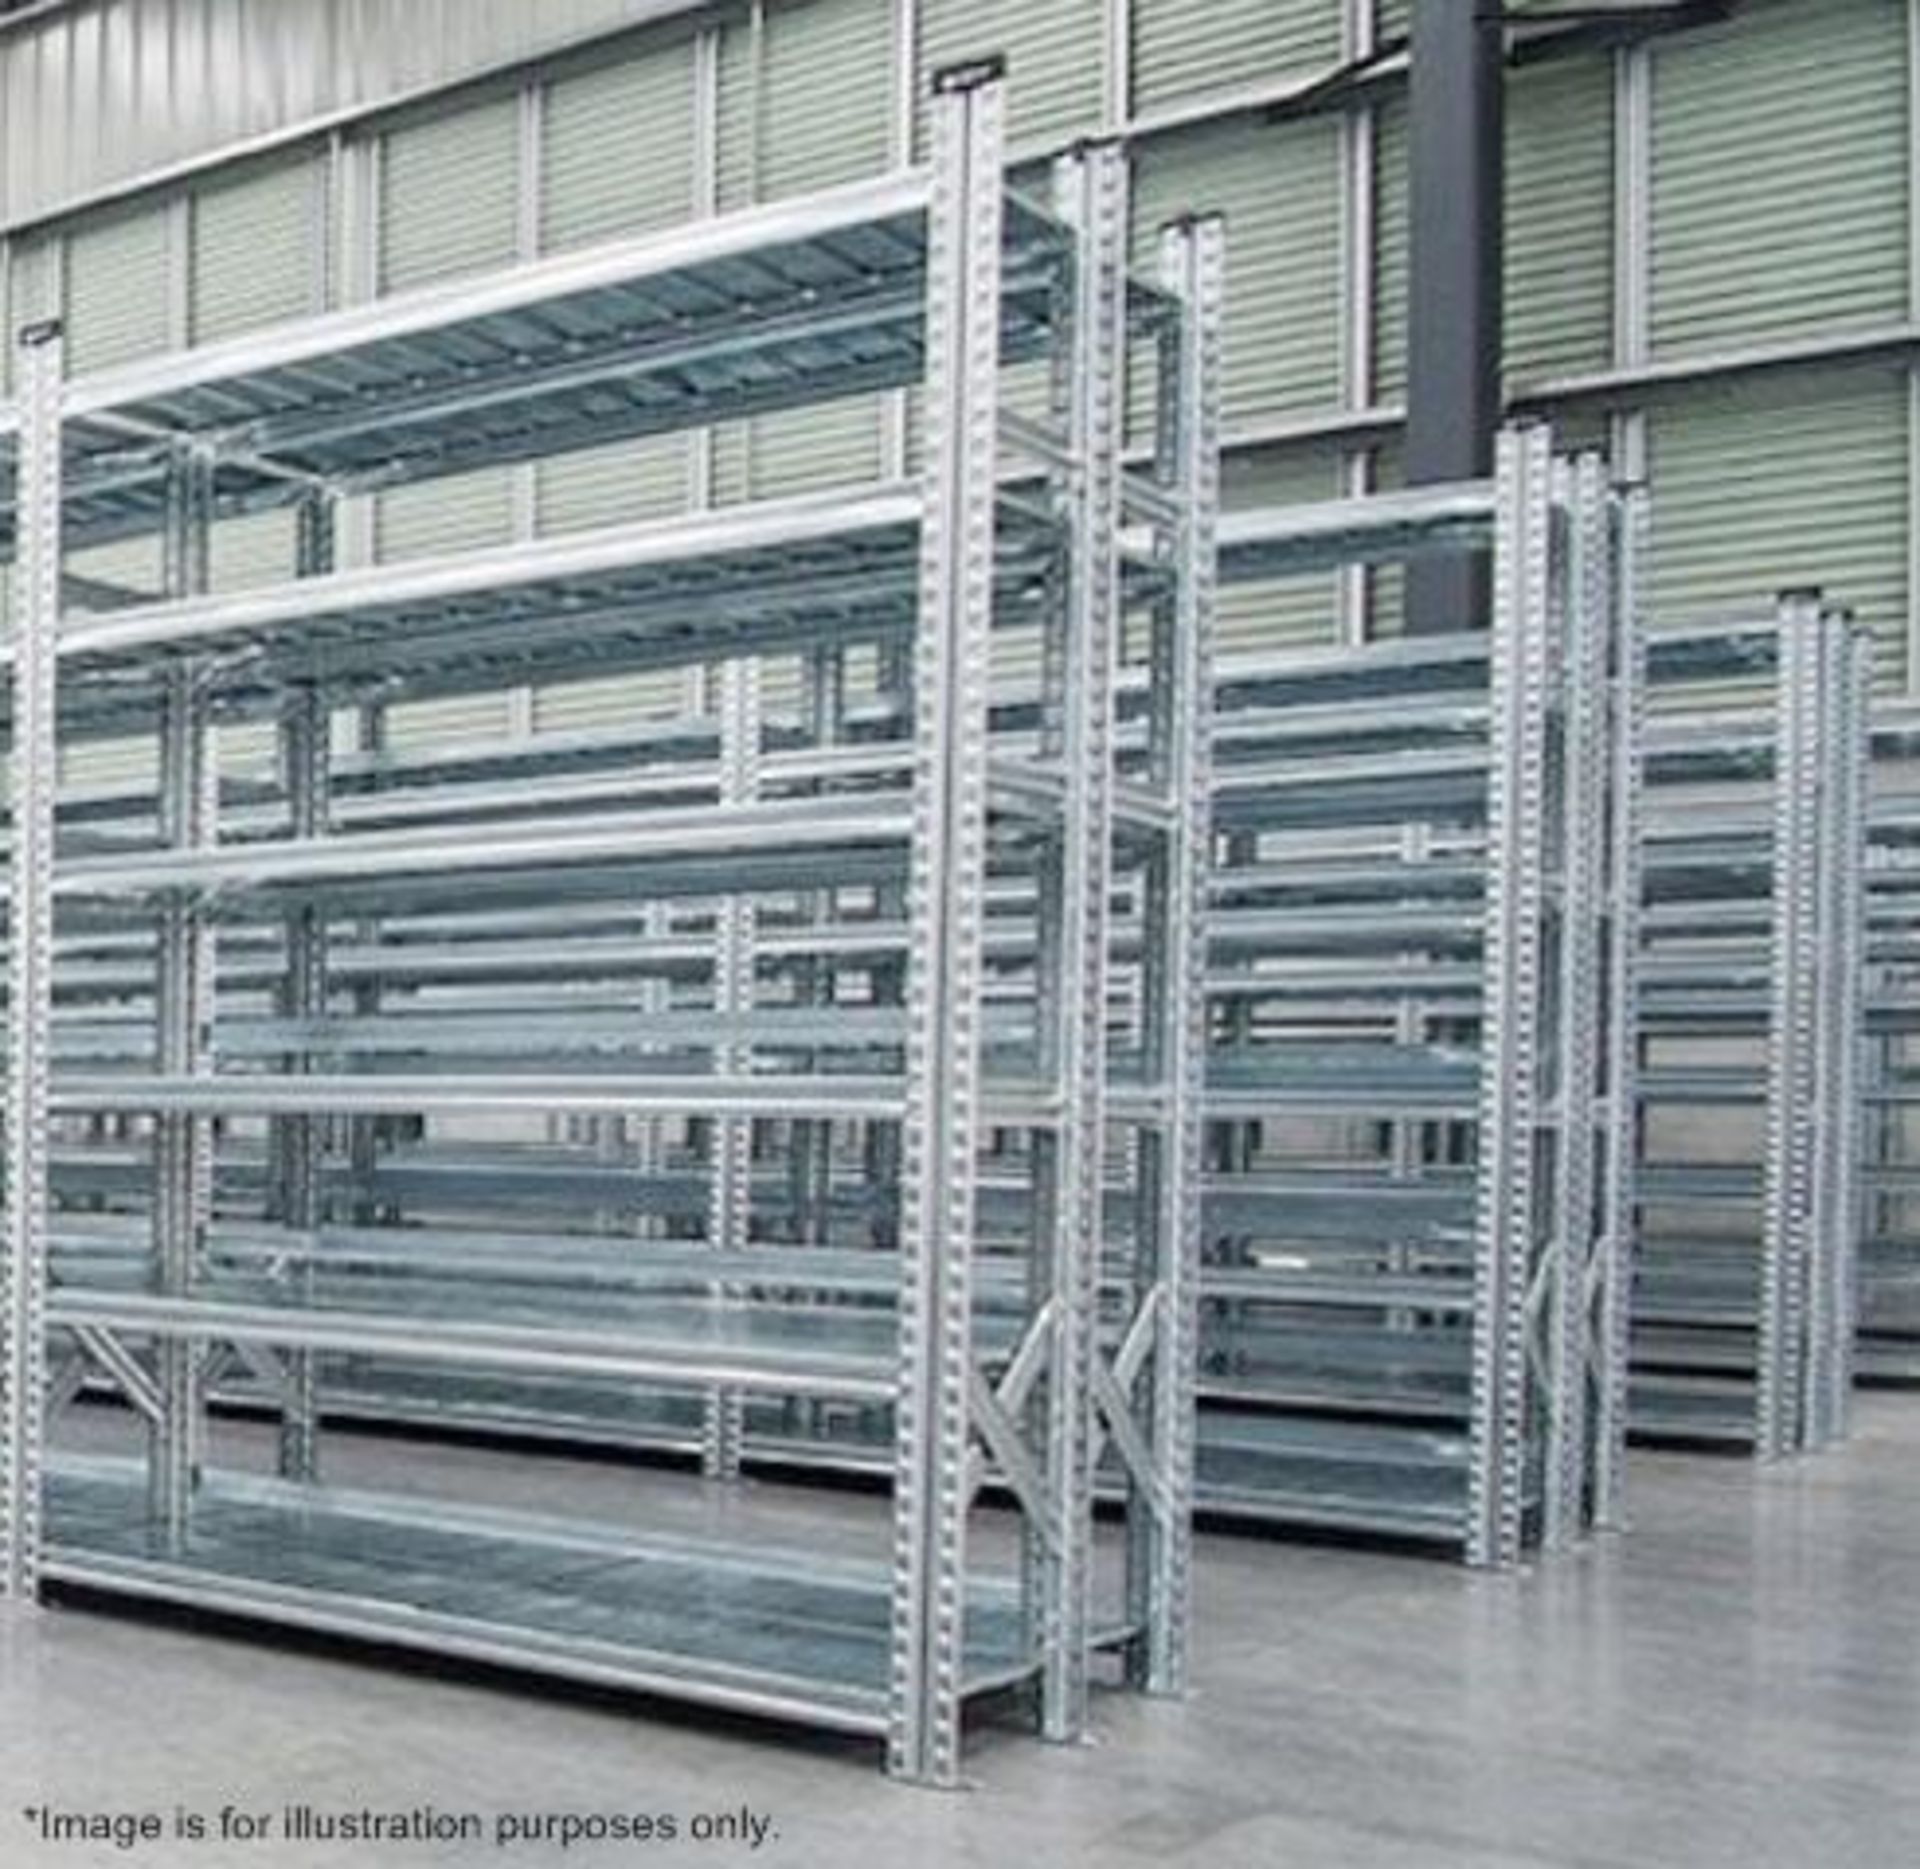 4 x Bays of Metalsistem Steel Modular Storage Shelving - Includes 29 Pieces - Recently Removed - Image 6 of 17